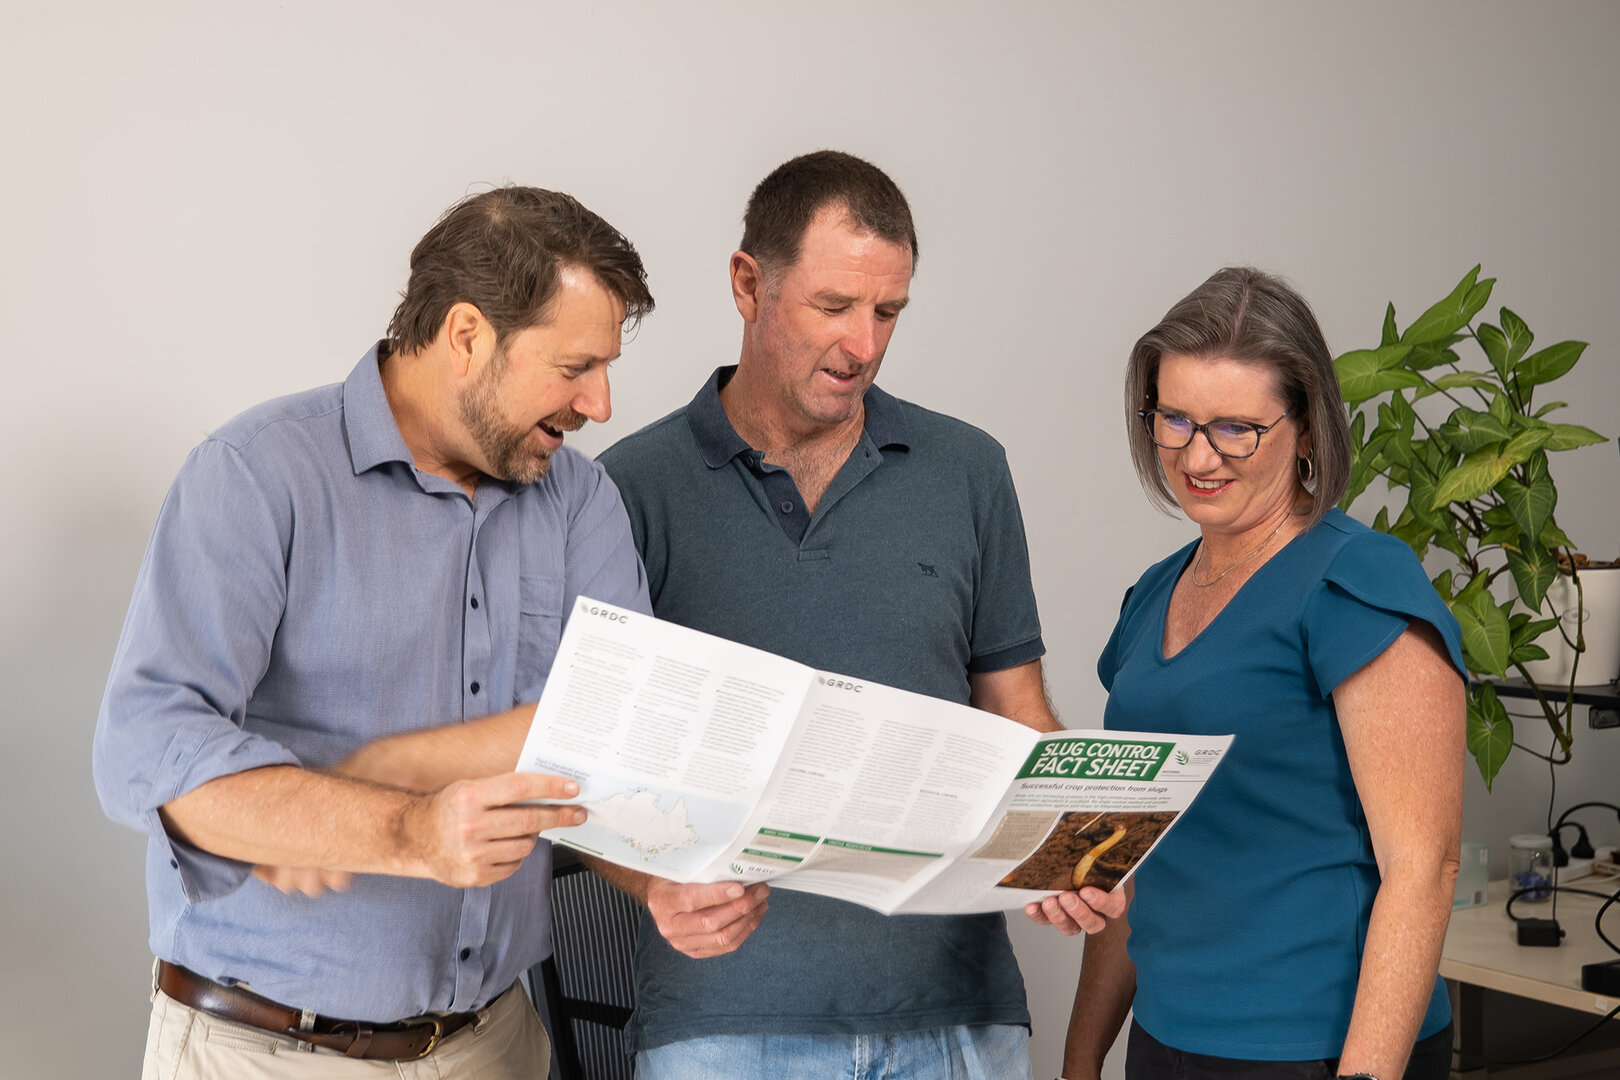 Majella, Paul, and Keith stand together in an office, looking at a pamphlet